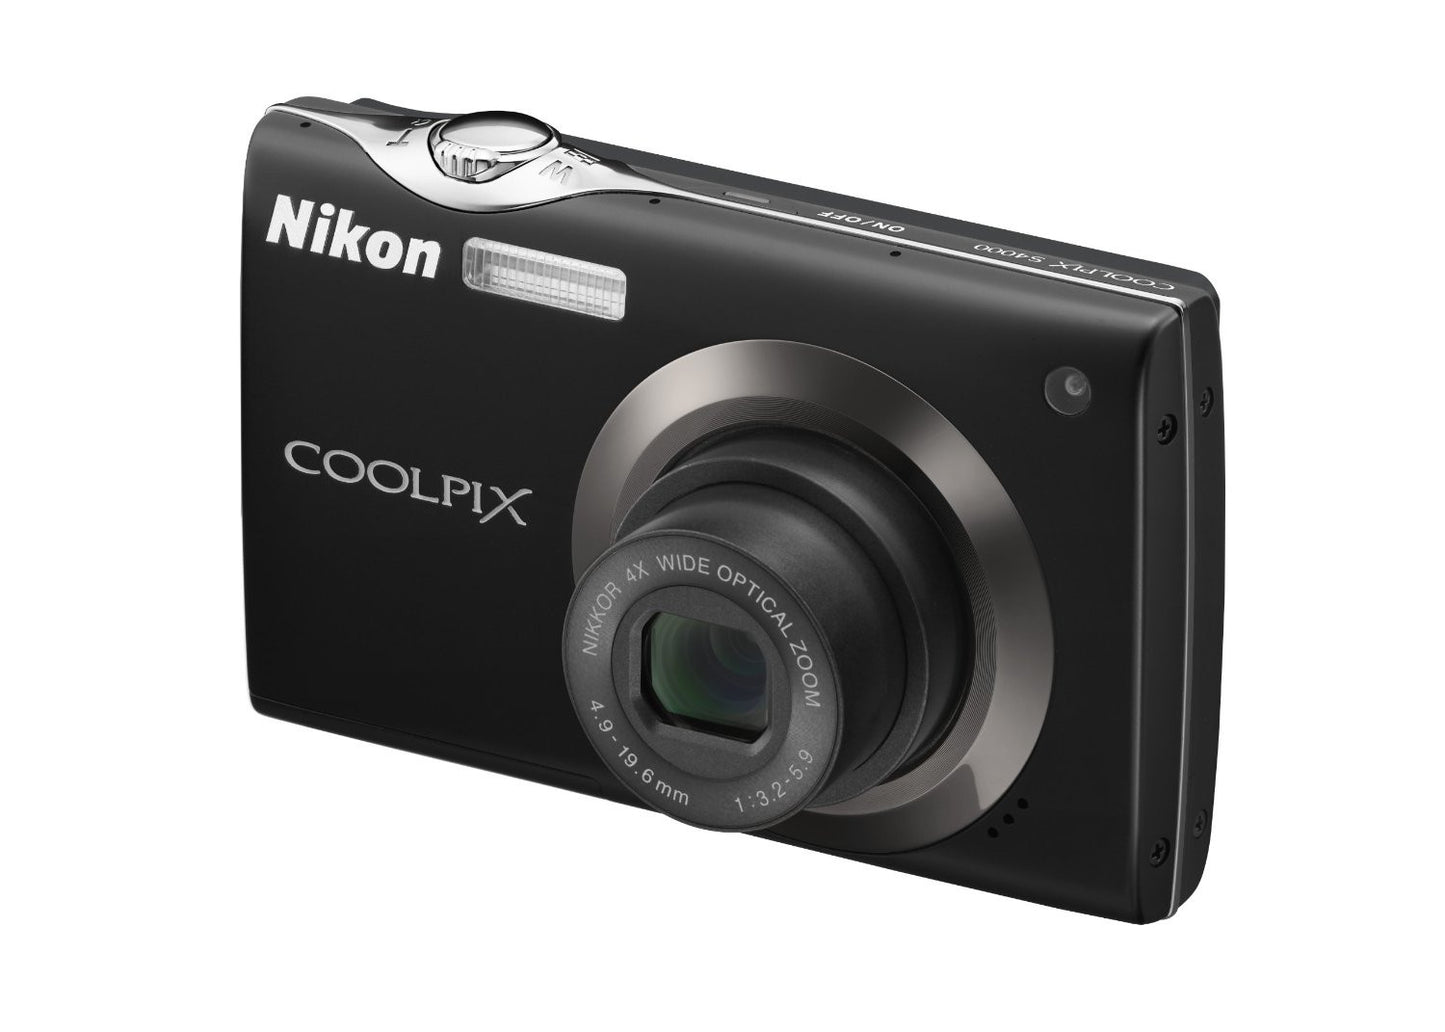 Nikon Coolpix S4000 12 MP Digital Camera with 4x Optical Vibration Reduction (VR) Zoom and 3.0-Inch Touch-Panel LCD (Black) - worldtradesolution.com
 - 4